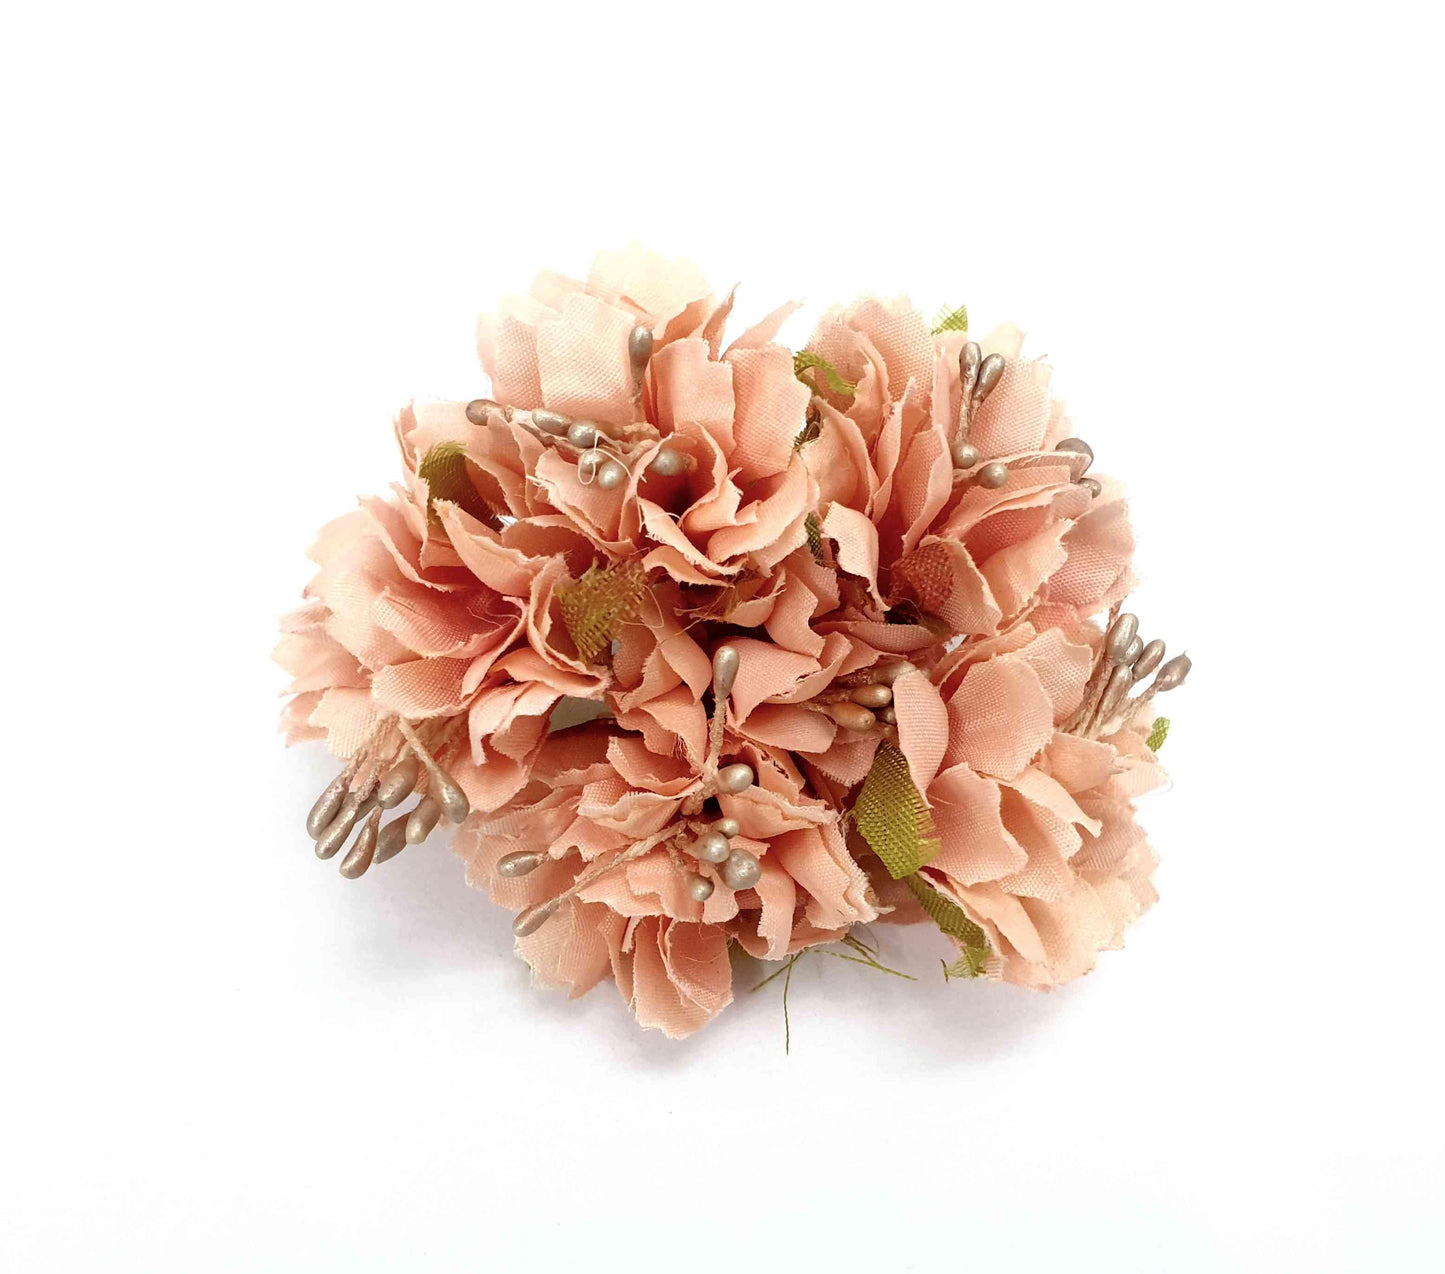 Indian Petals Beautiful Fabric Flowers for DIY Craft, Trouseau Packing or Decoration (Bunch of 12) - Design 19, Peach